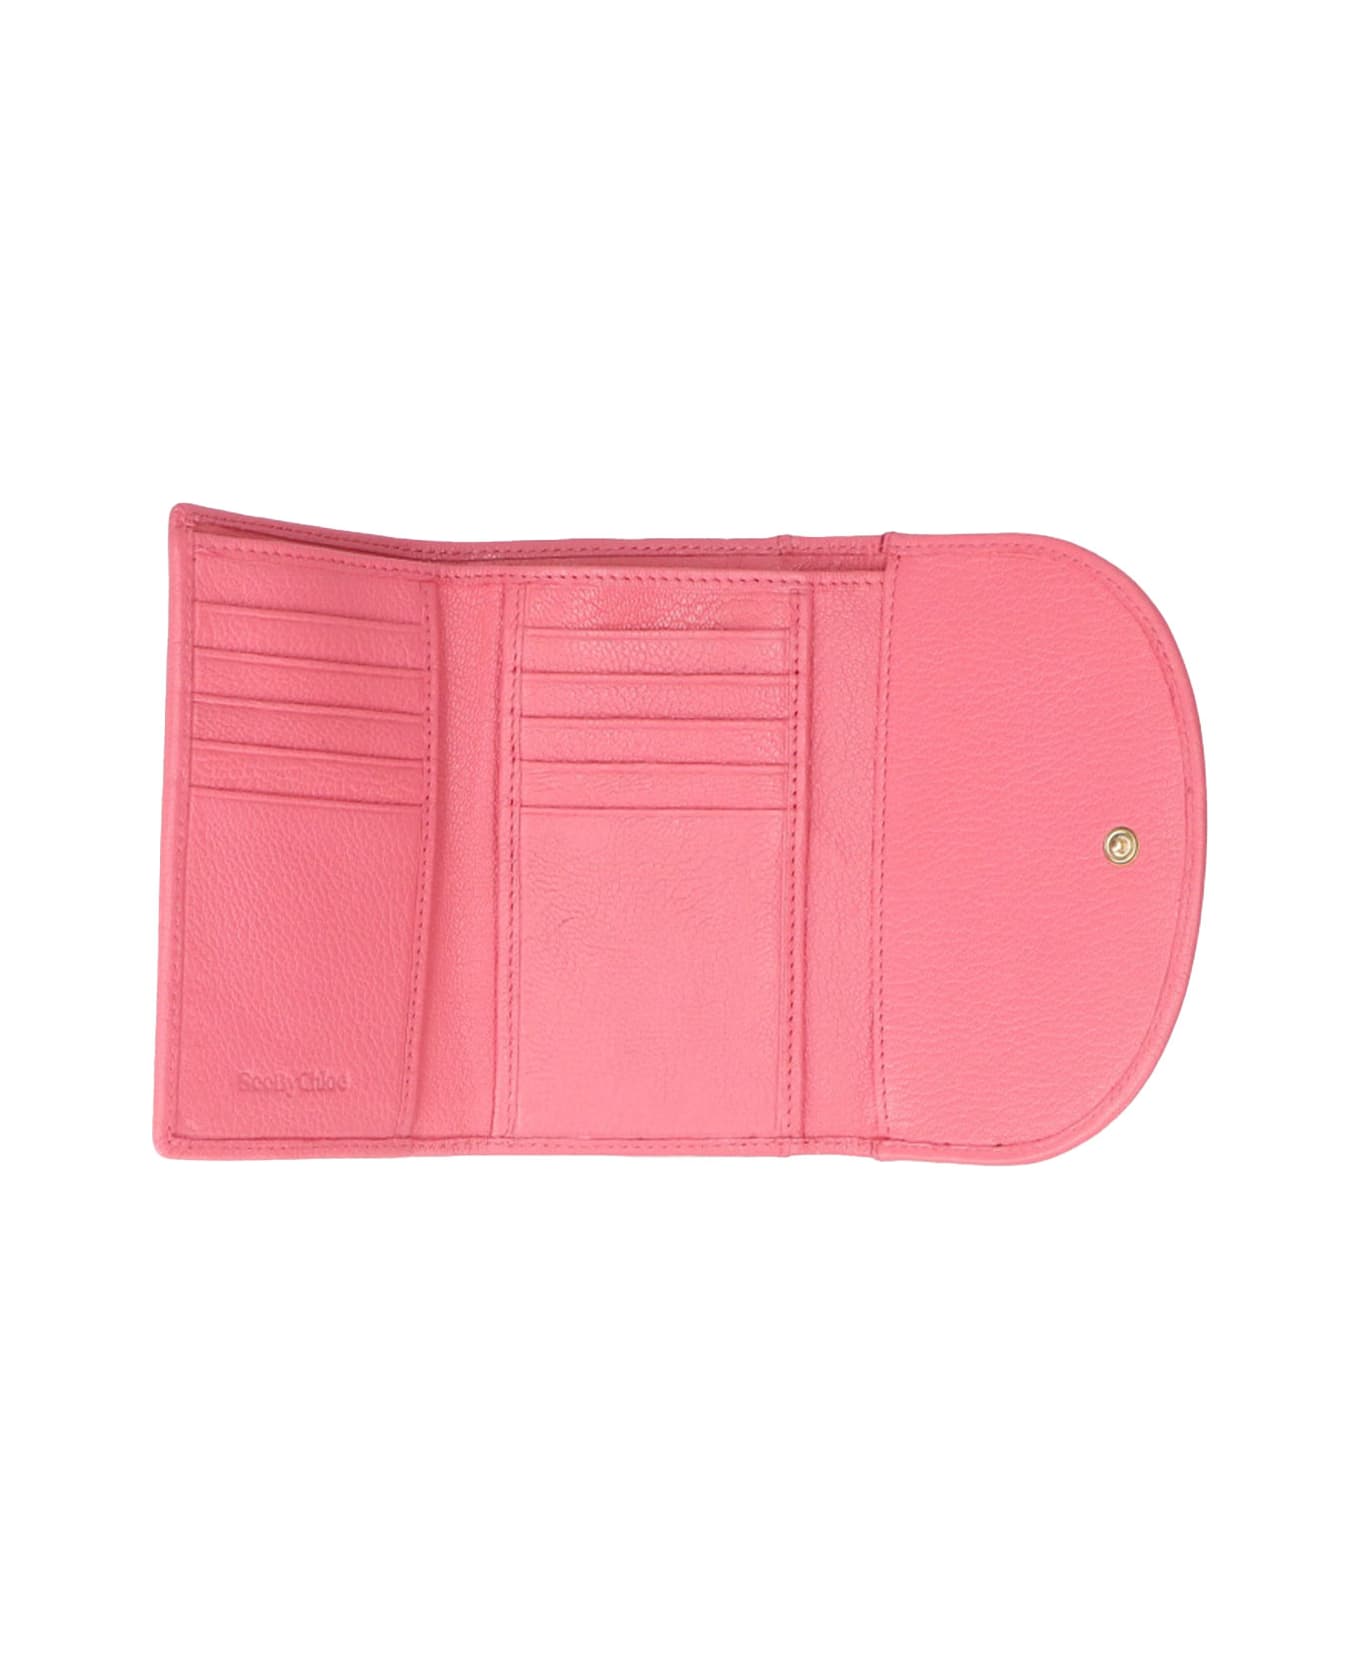 See by Chloé Wallet - PUSHY PINK